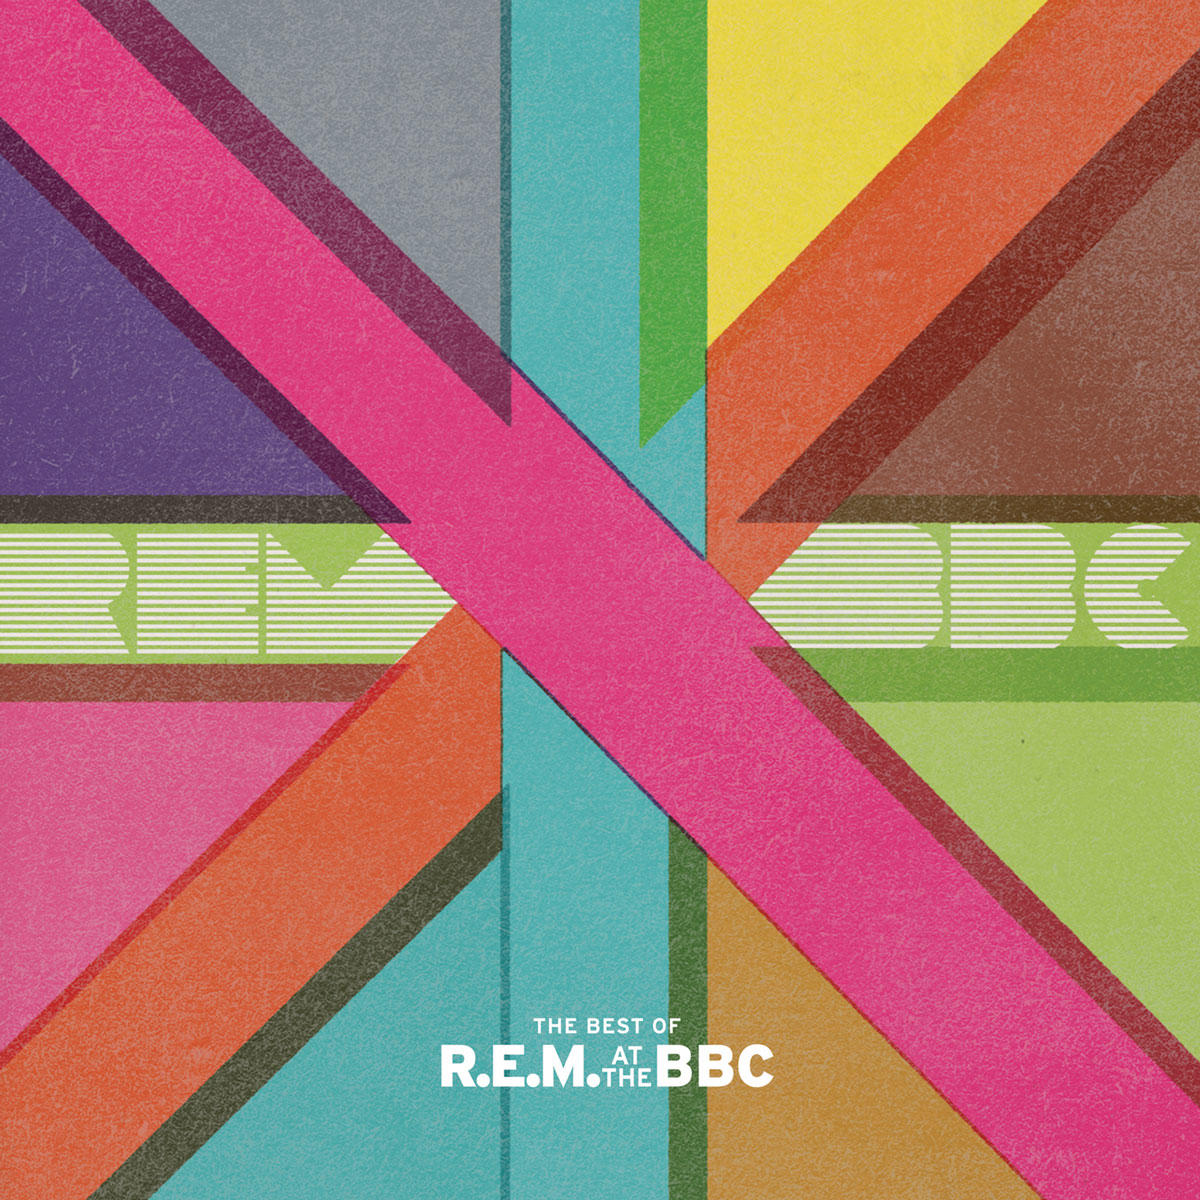 R.E.M. (CD) Best BBC At R.E.M. The Of - The -